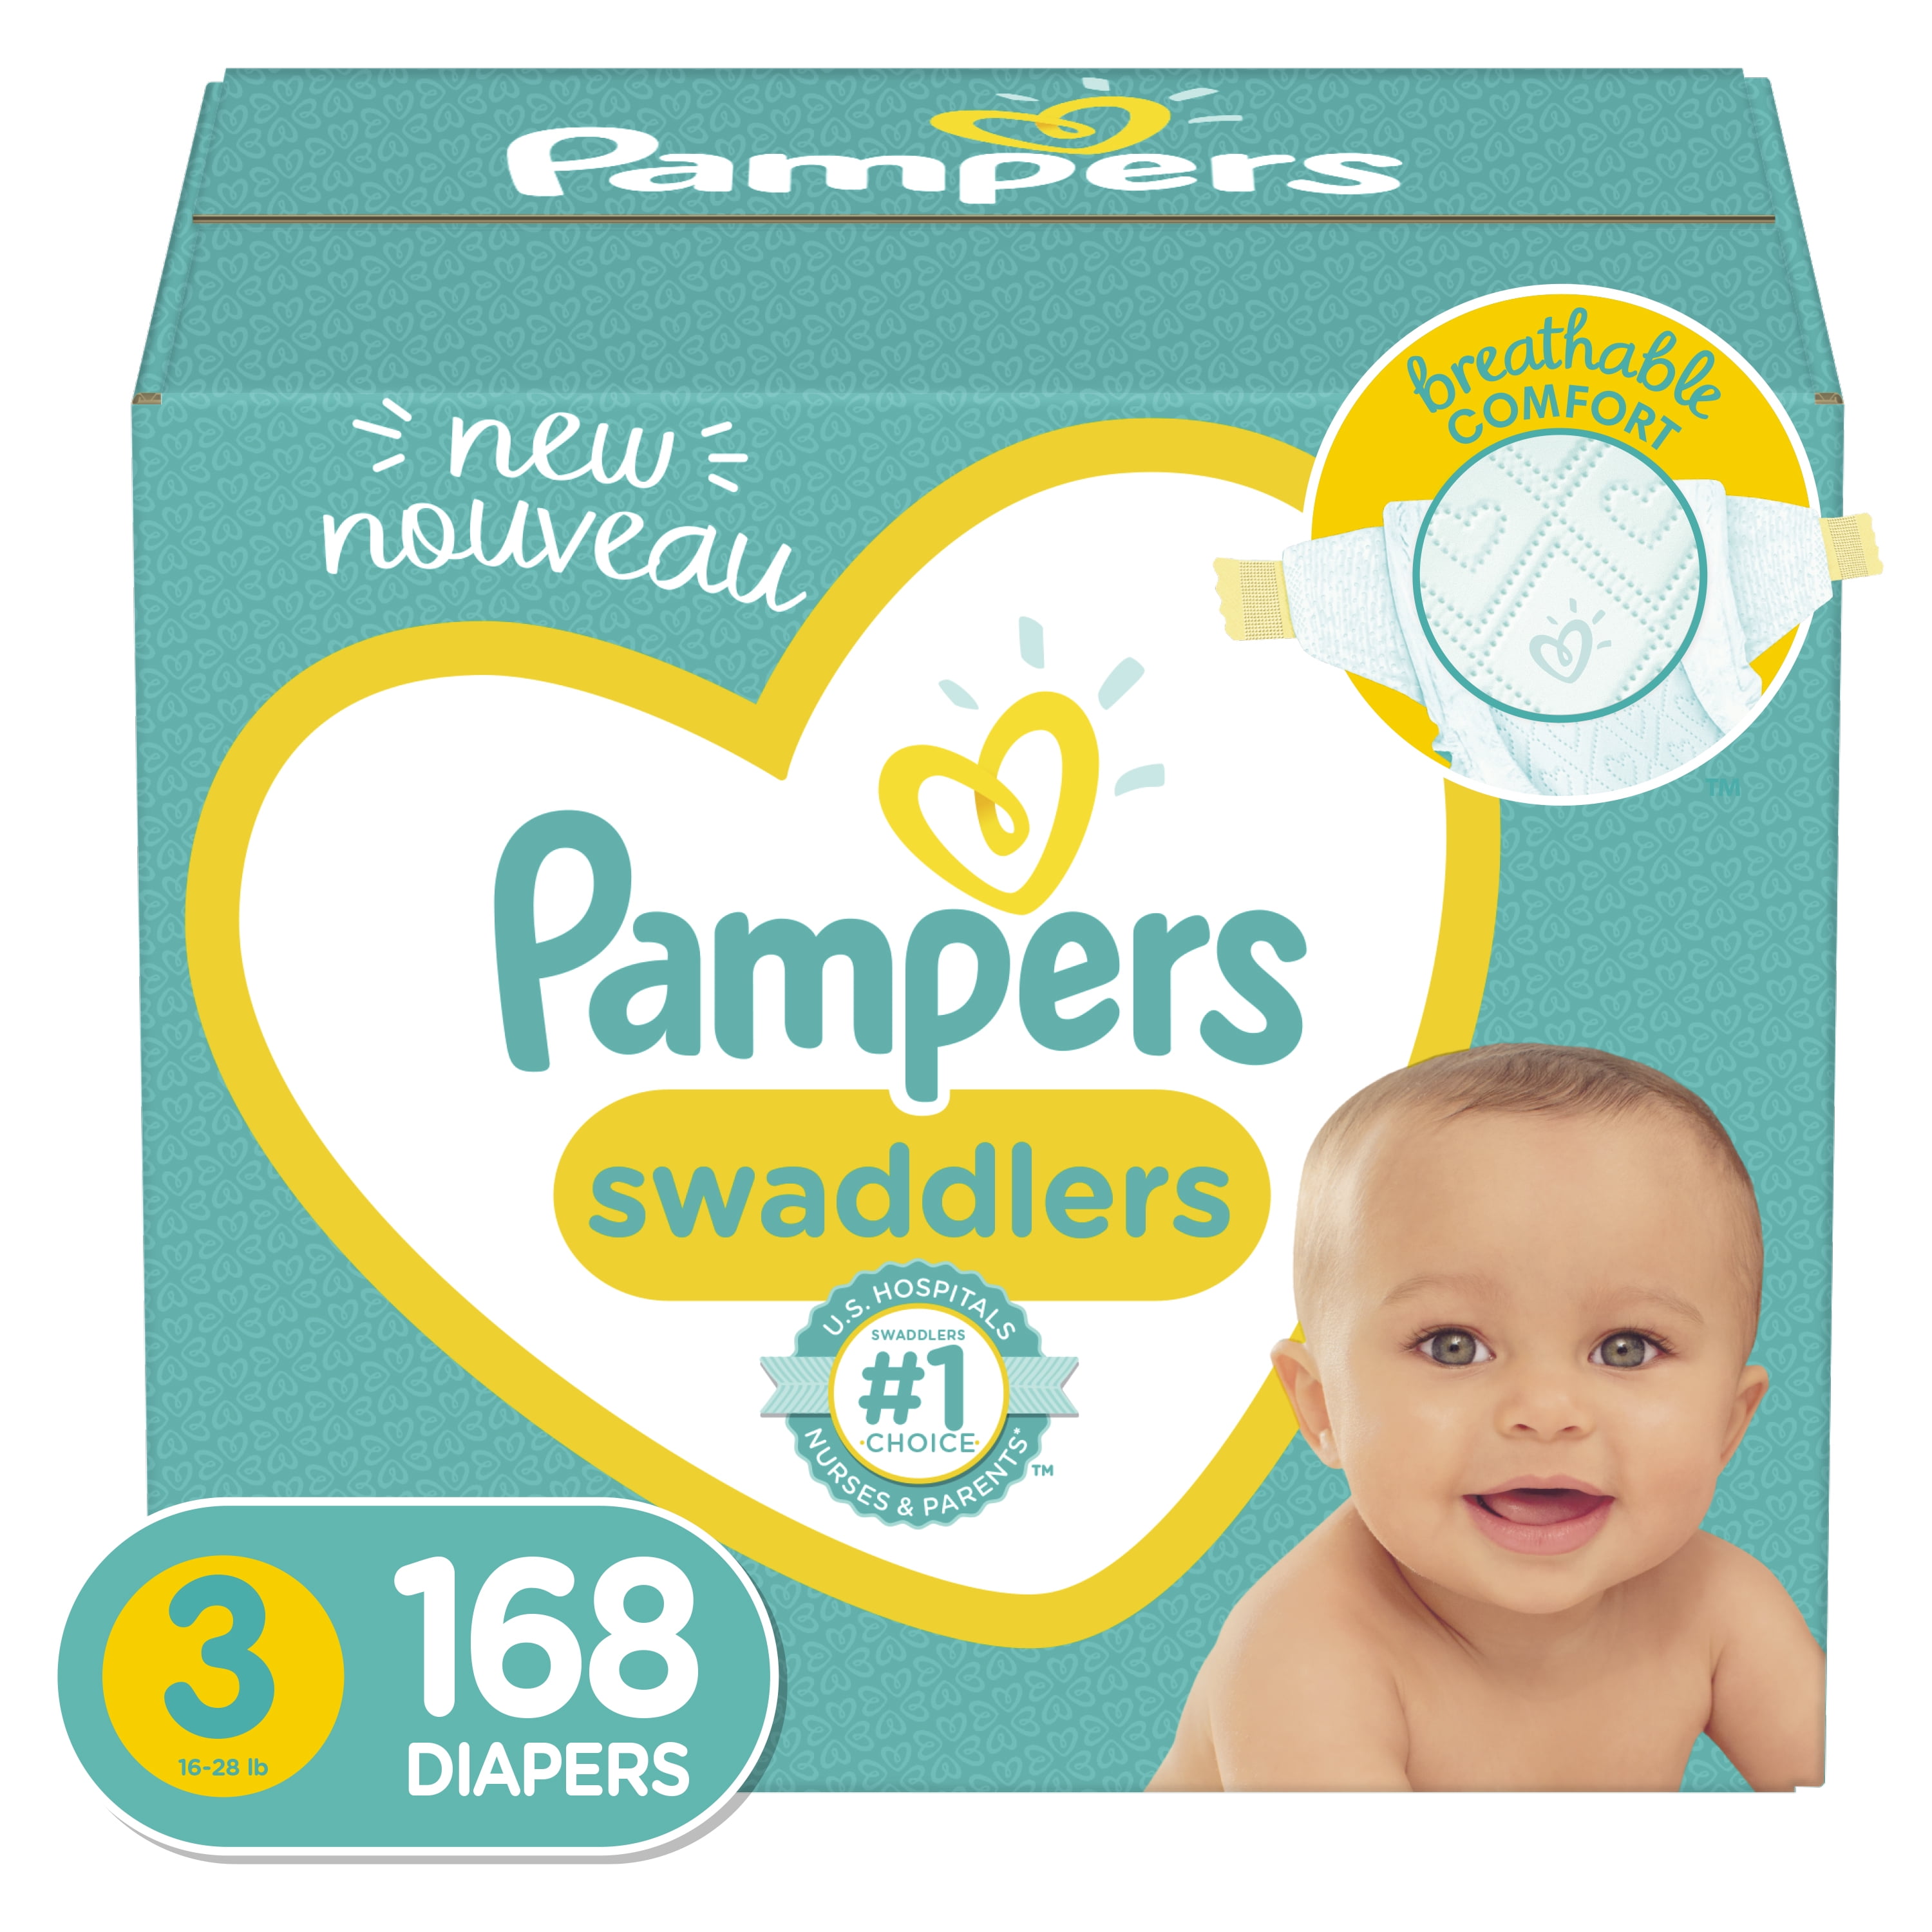 Analytical unrelated Aspire Pampers Swaddlers Diapers, Soft and Absorbent, Size 3, 168 Ct - Walmart.com